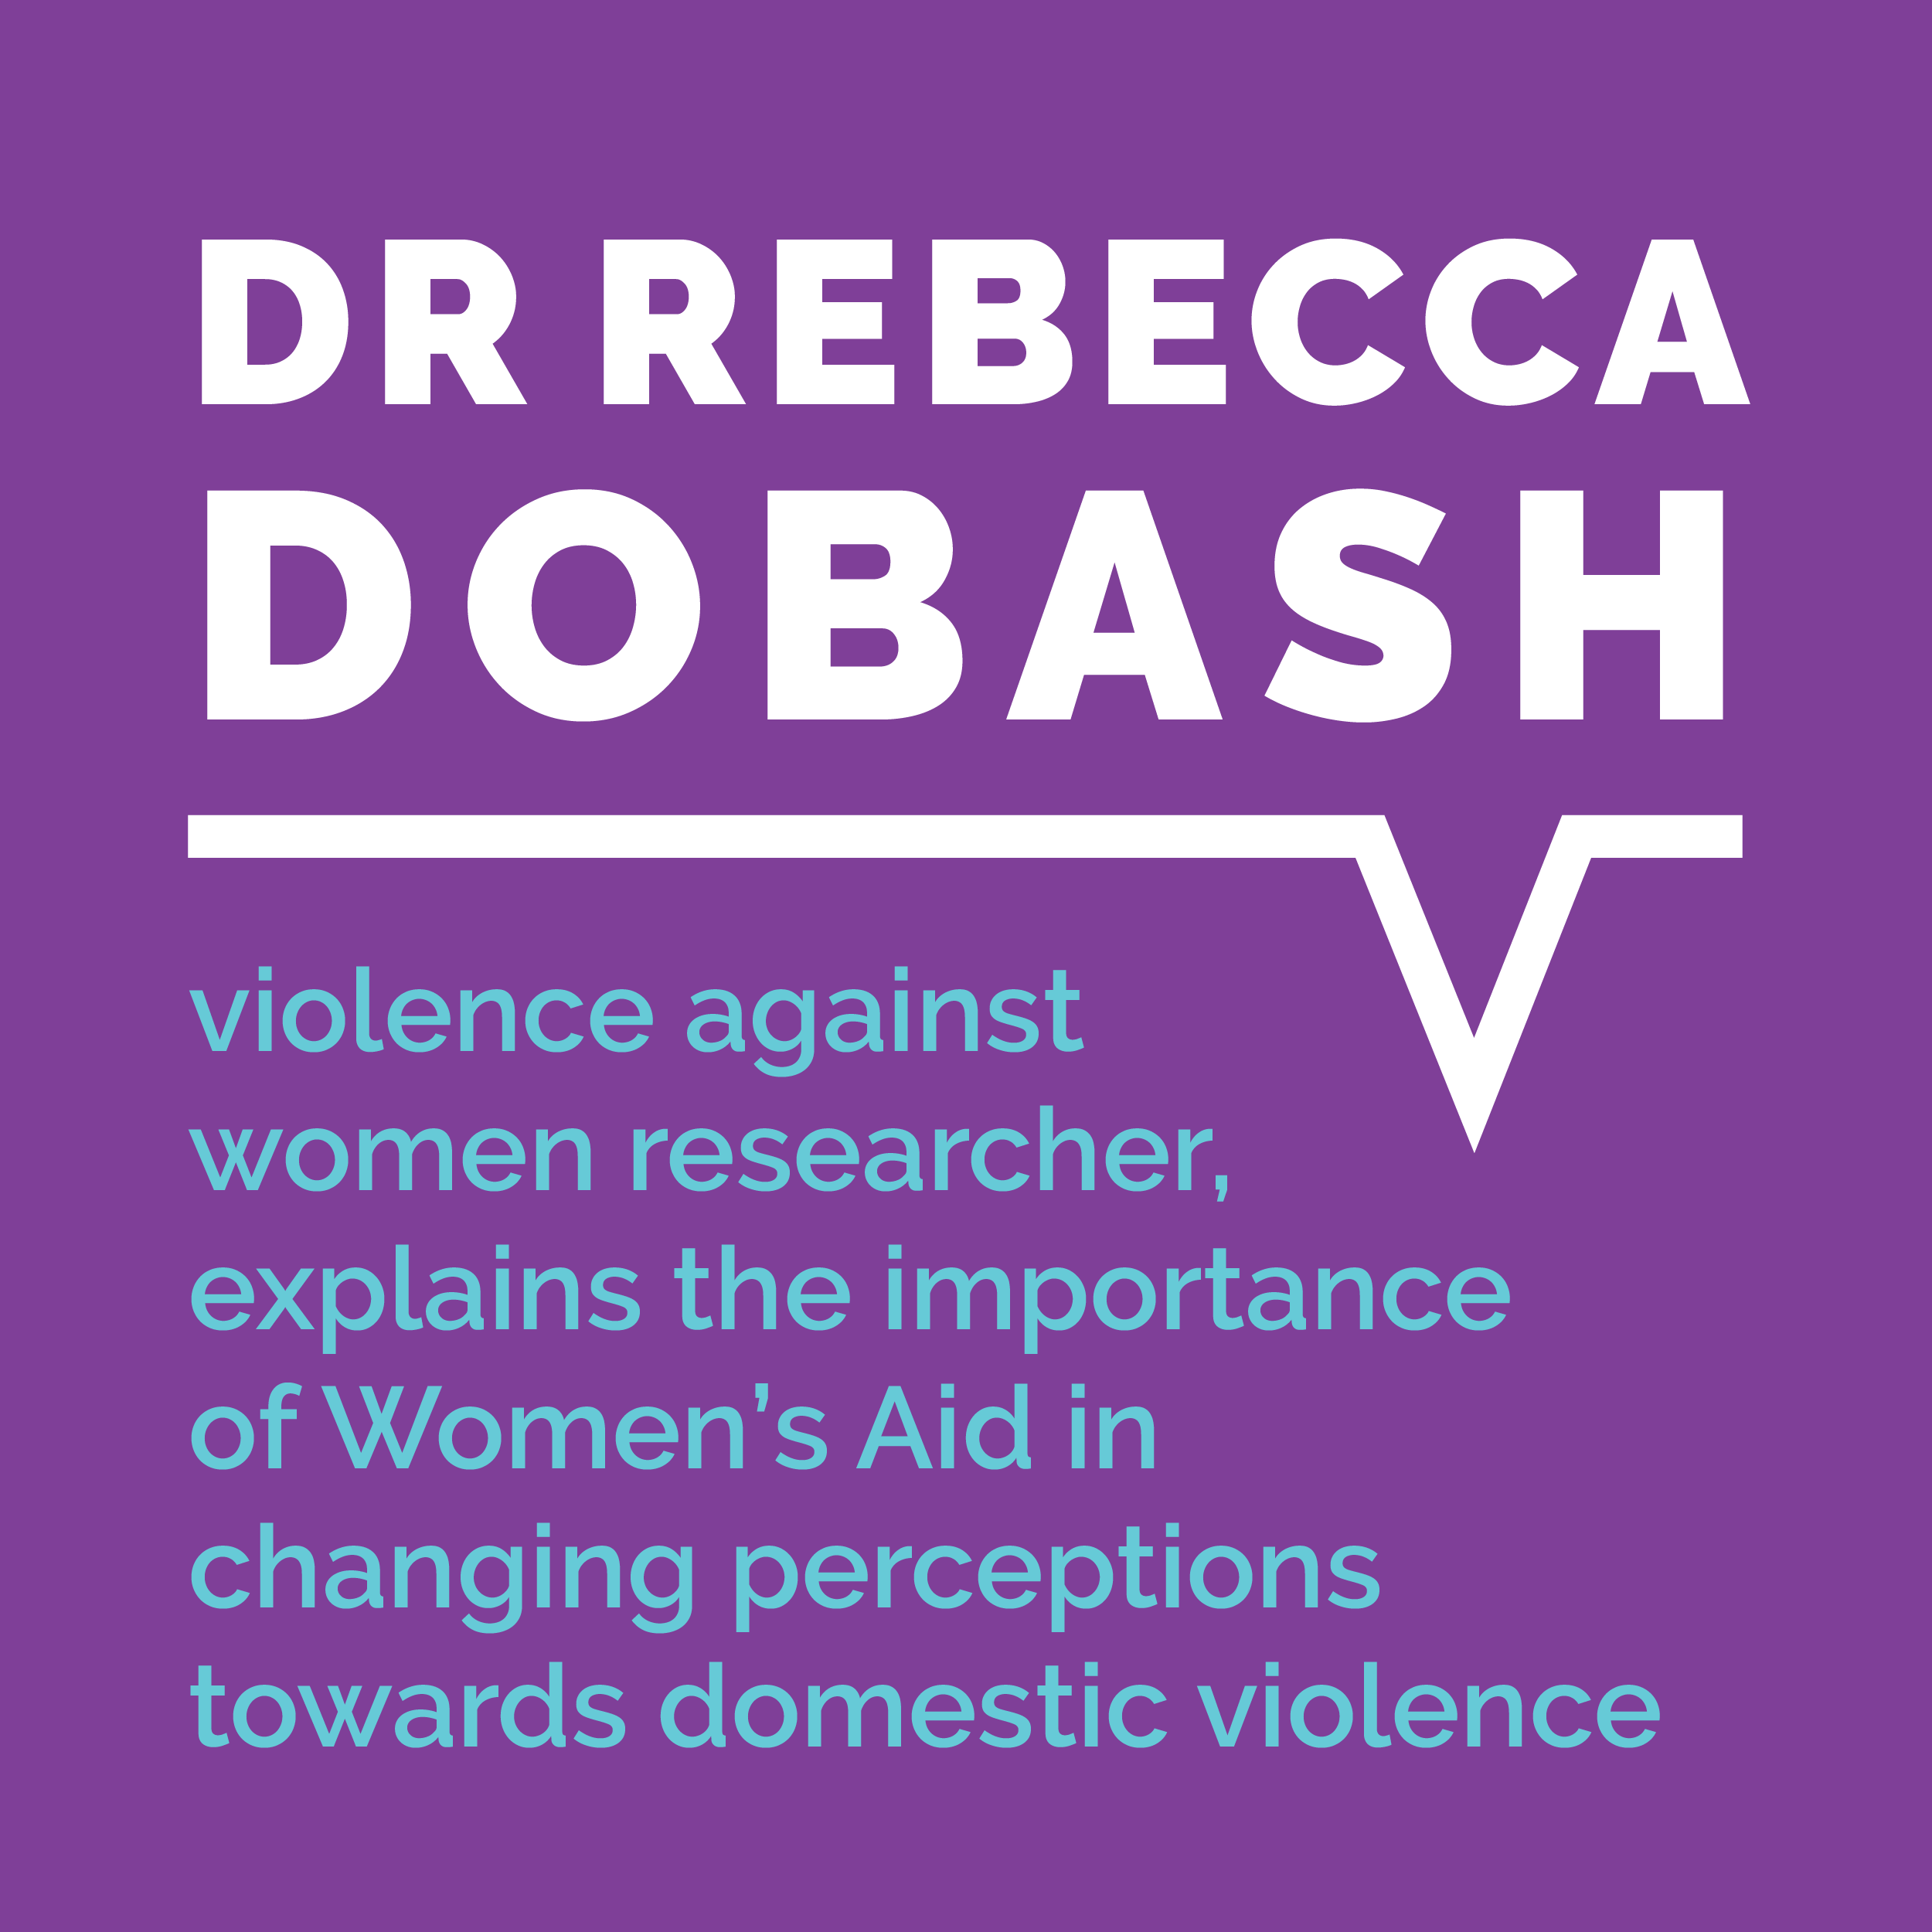 Dr Rebecca Dobash, violence against women researcher, explains the importance of Women's Aid in changing perceptions towards domestic violence